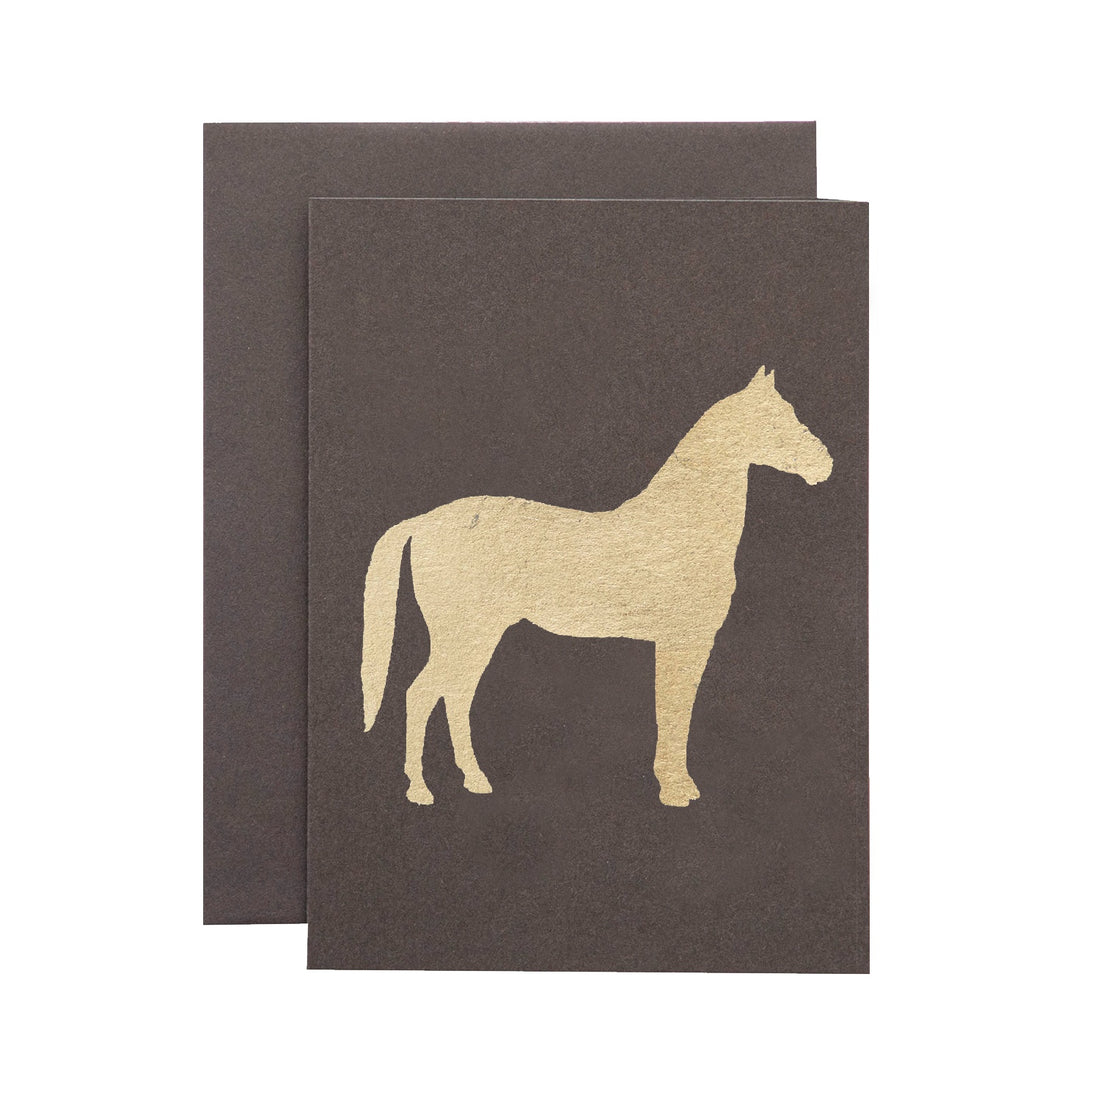 A dark brown card with the silhouette of a horse in solid gold leaf.